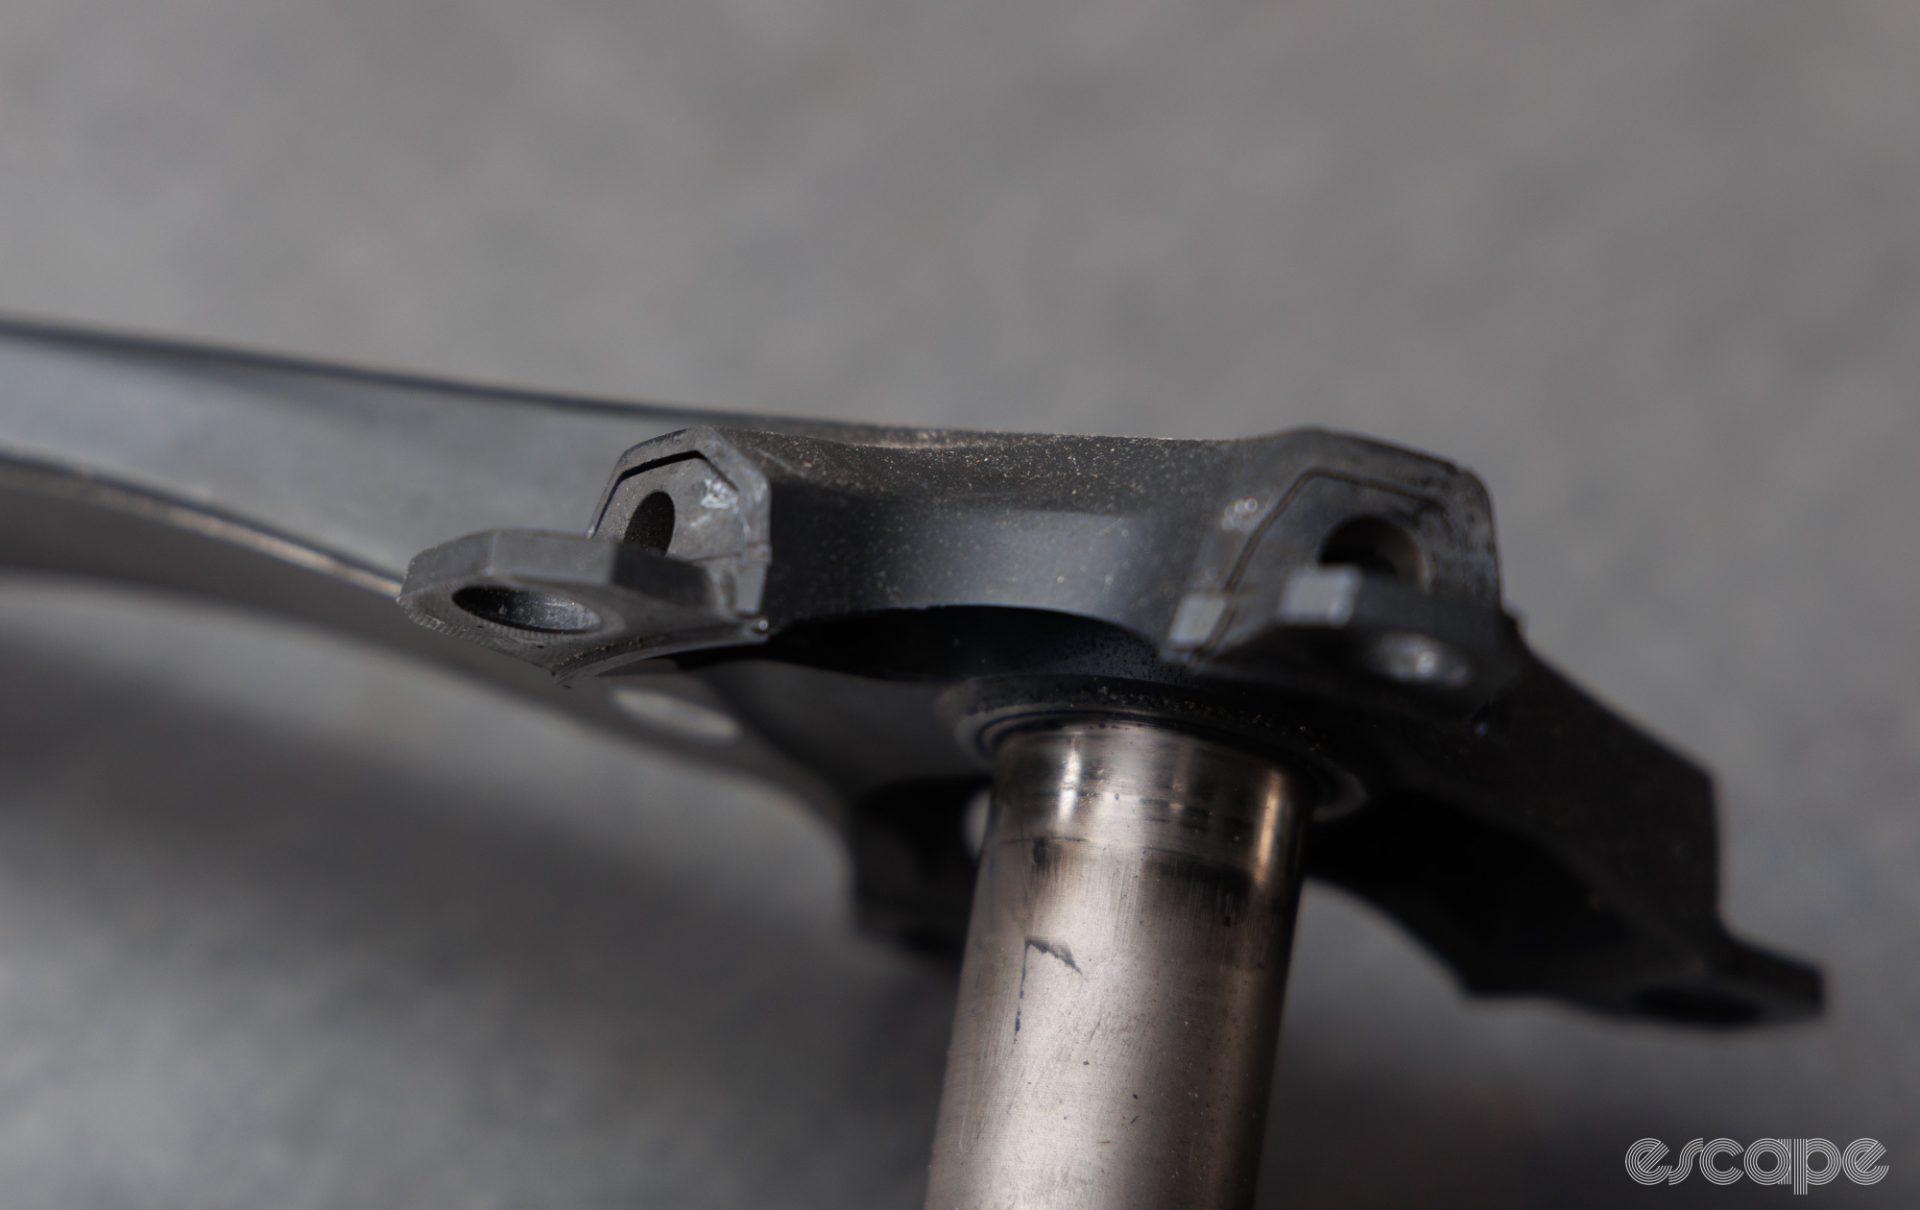 A Shimano crankarm in closeup, showing separation in the bond seam at the drive-side crankarm spider. Several small but noticeable gaps can be seen.